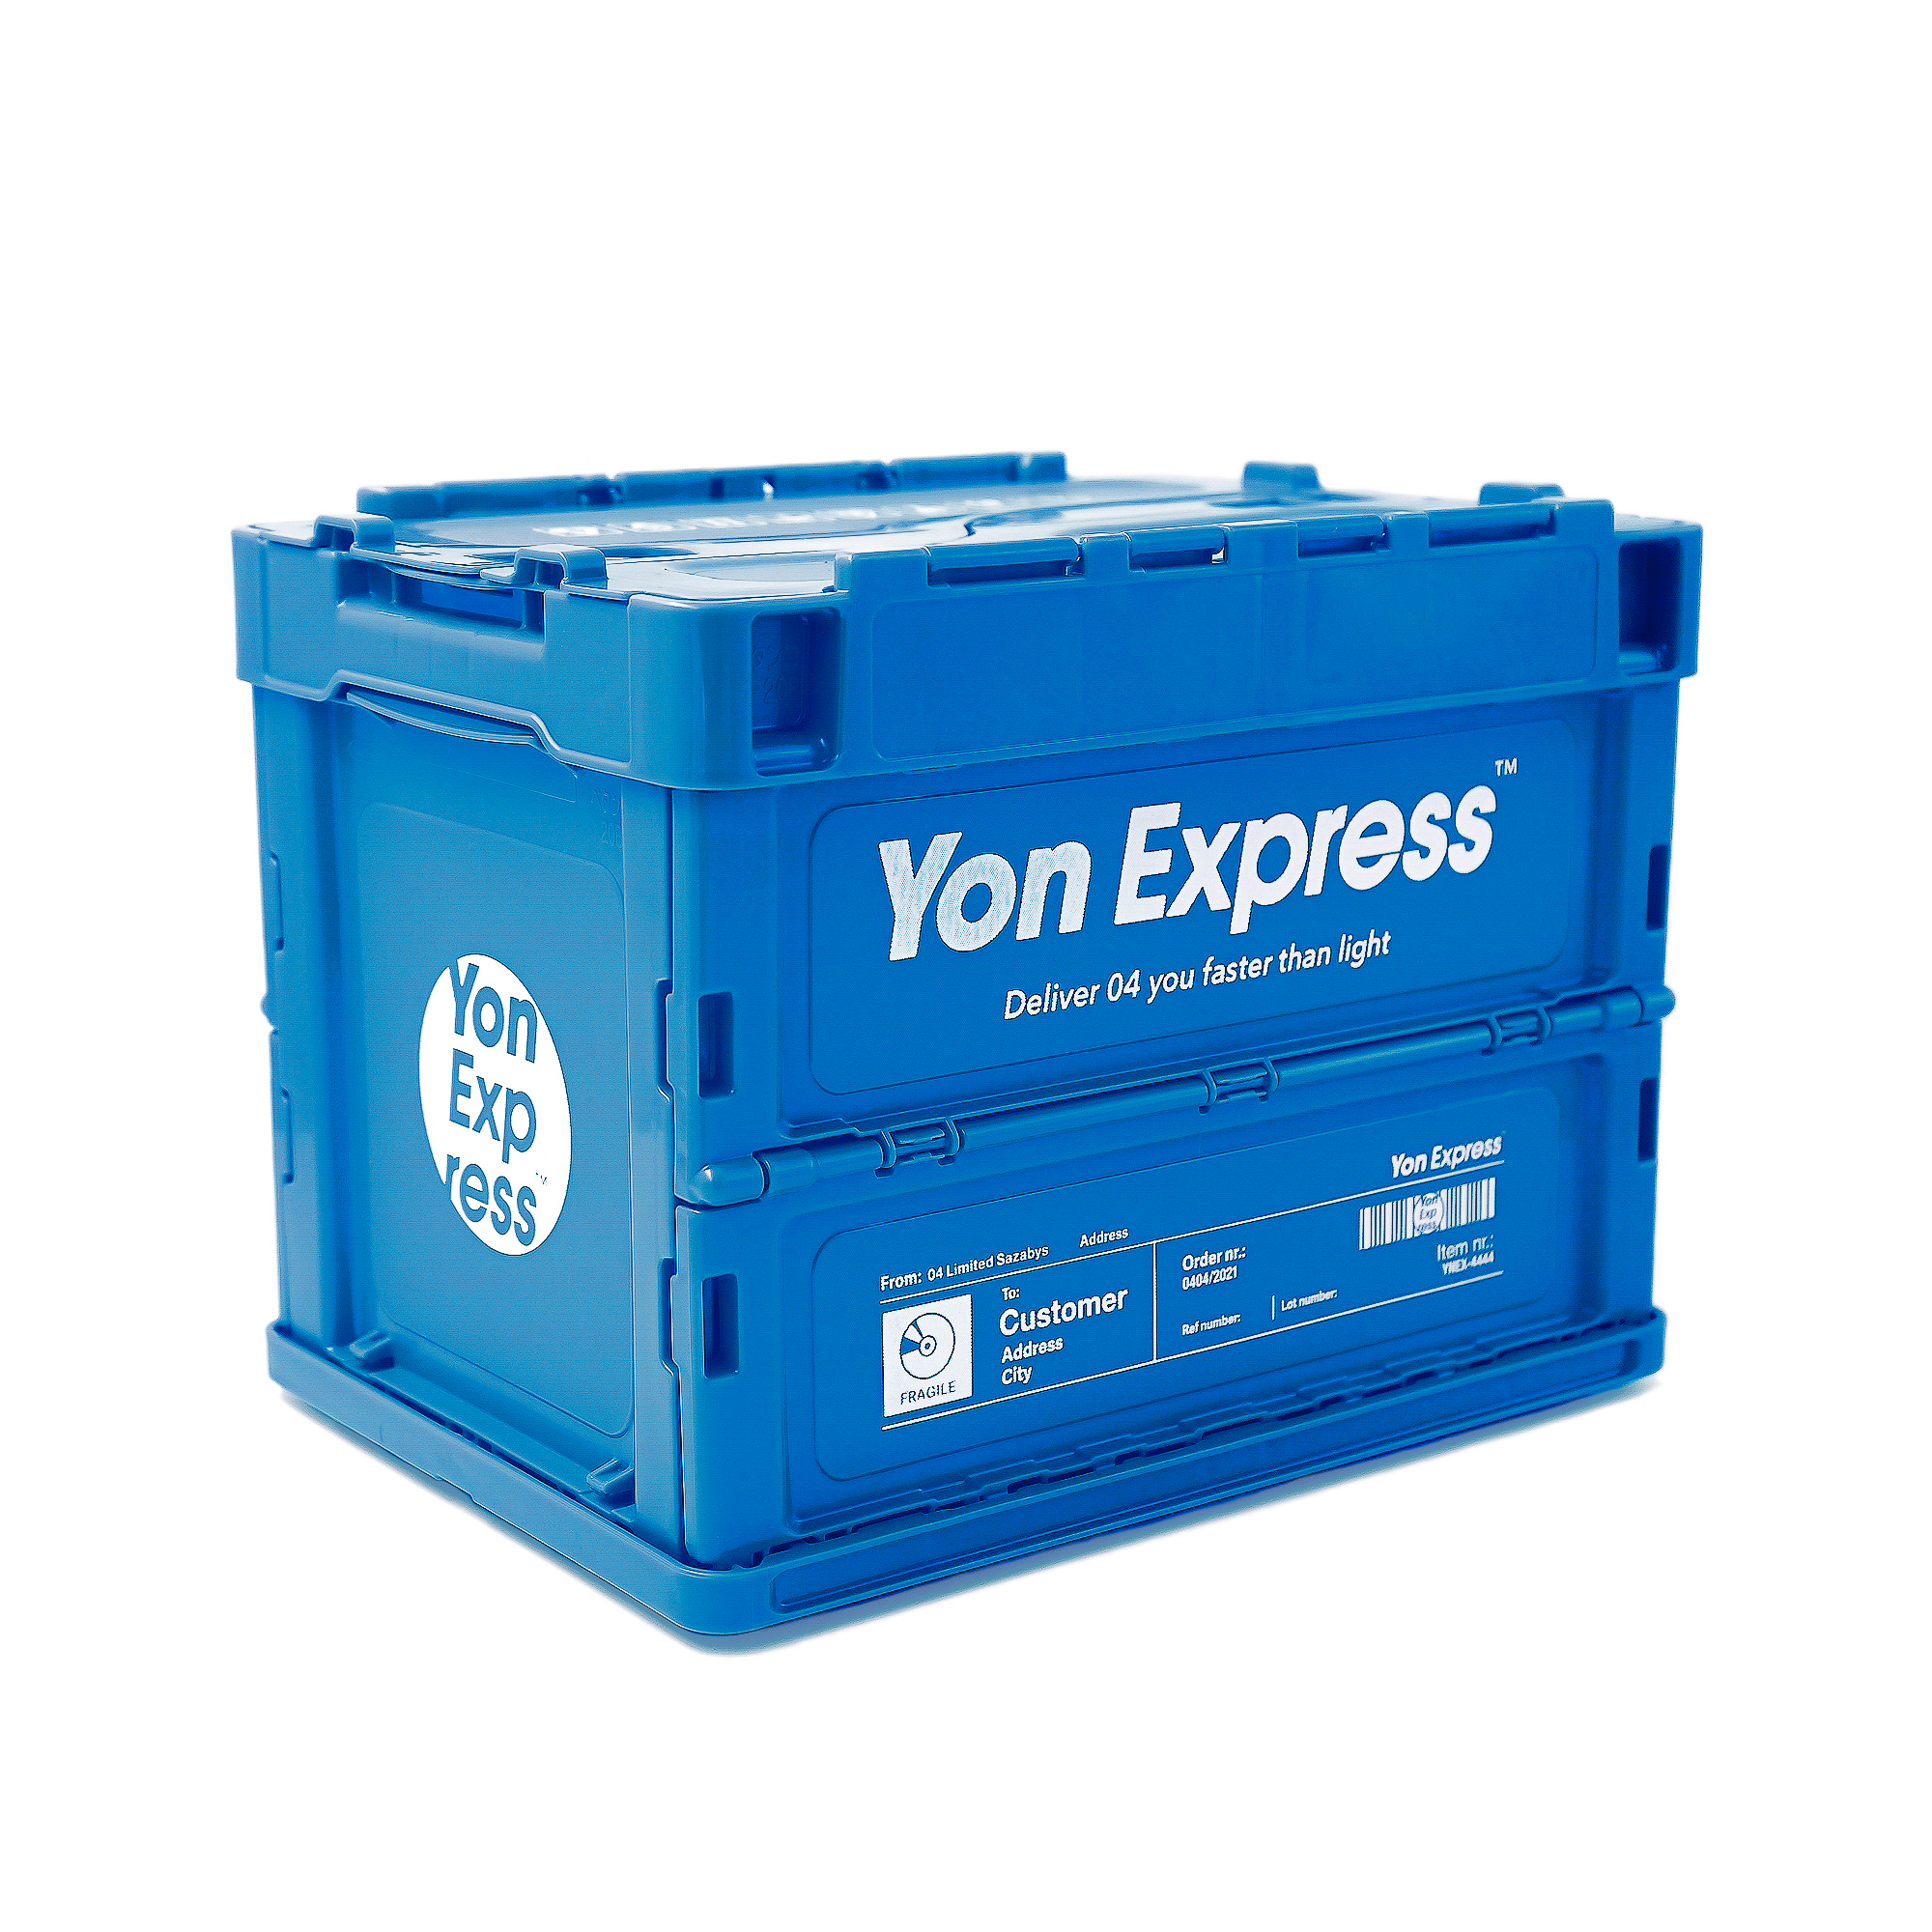 "Yon Express Container Box" 受注販売決定！